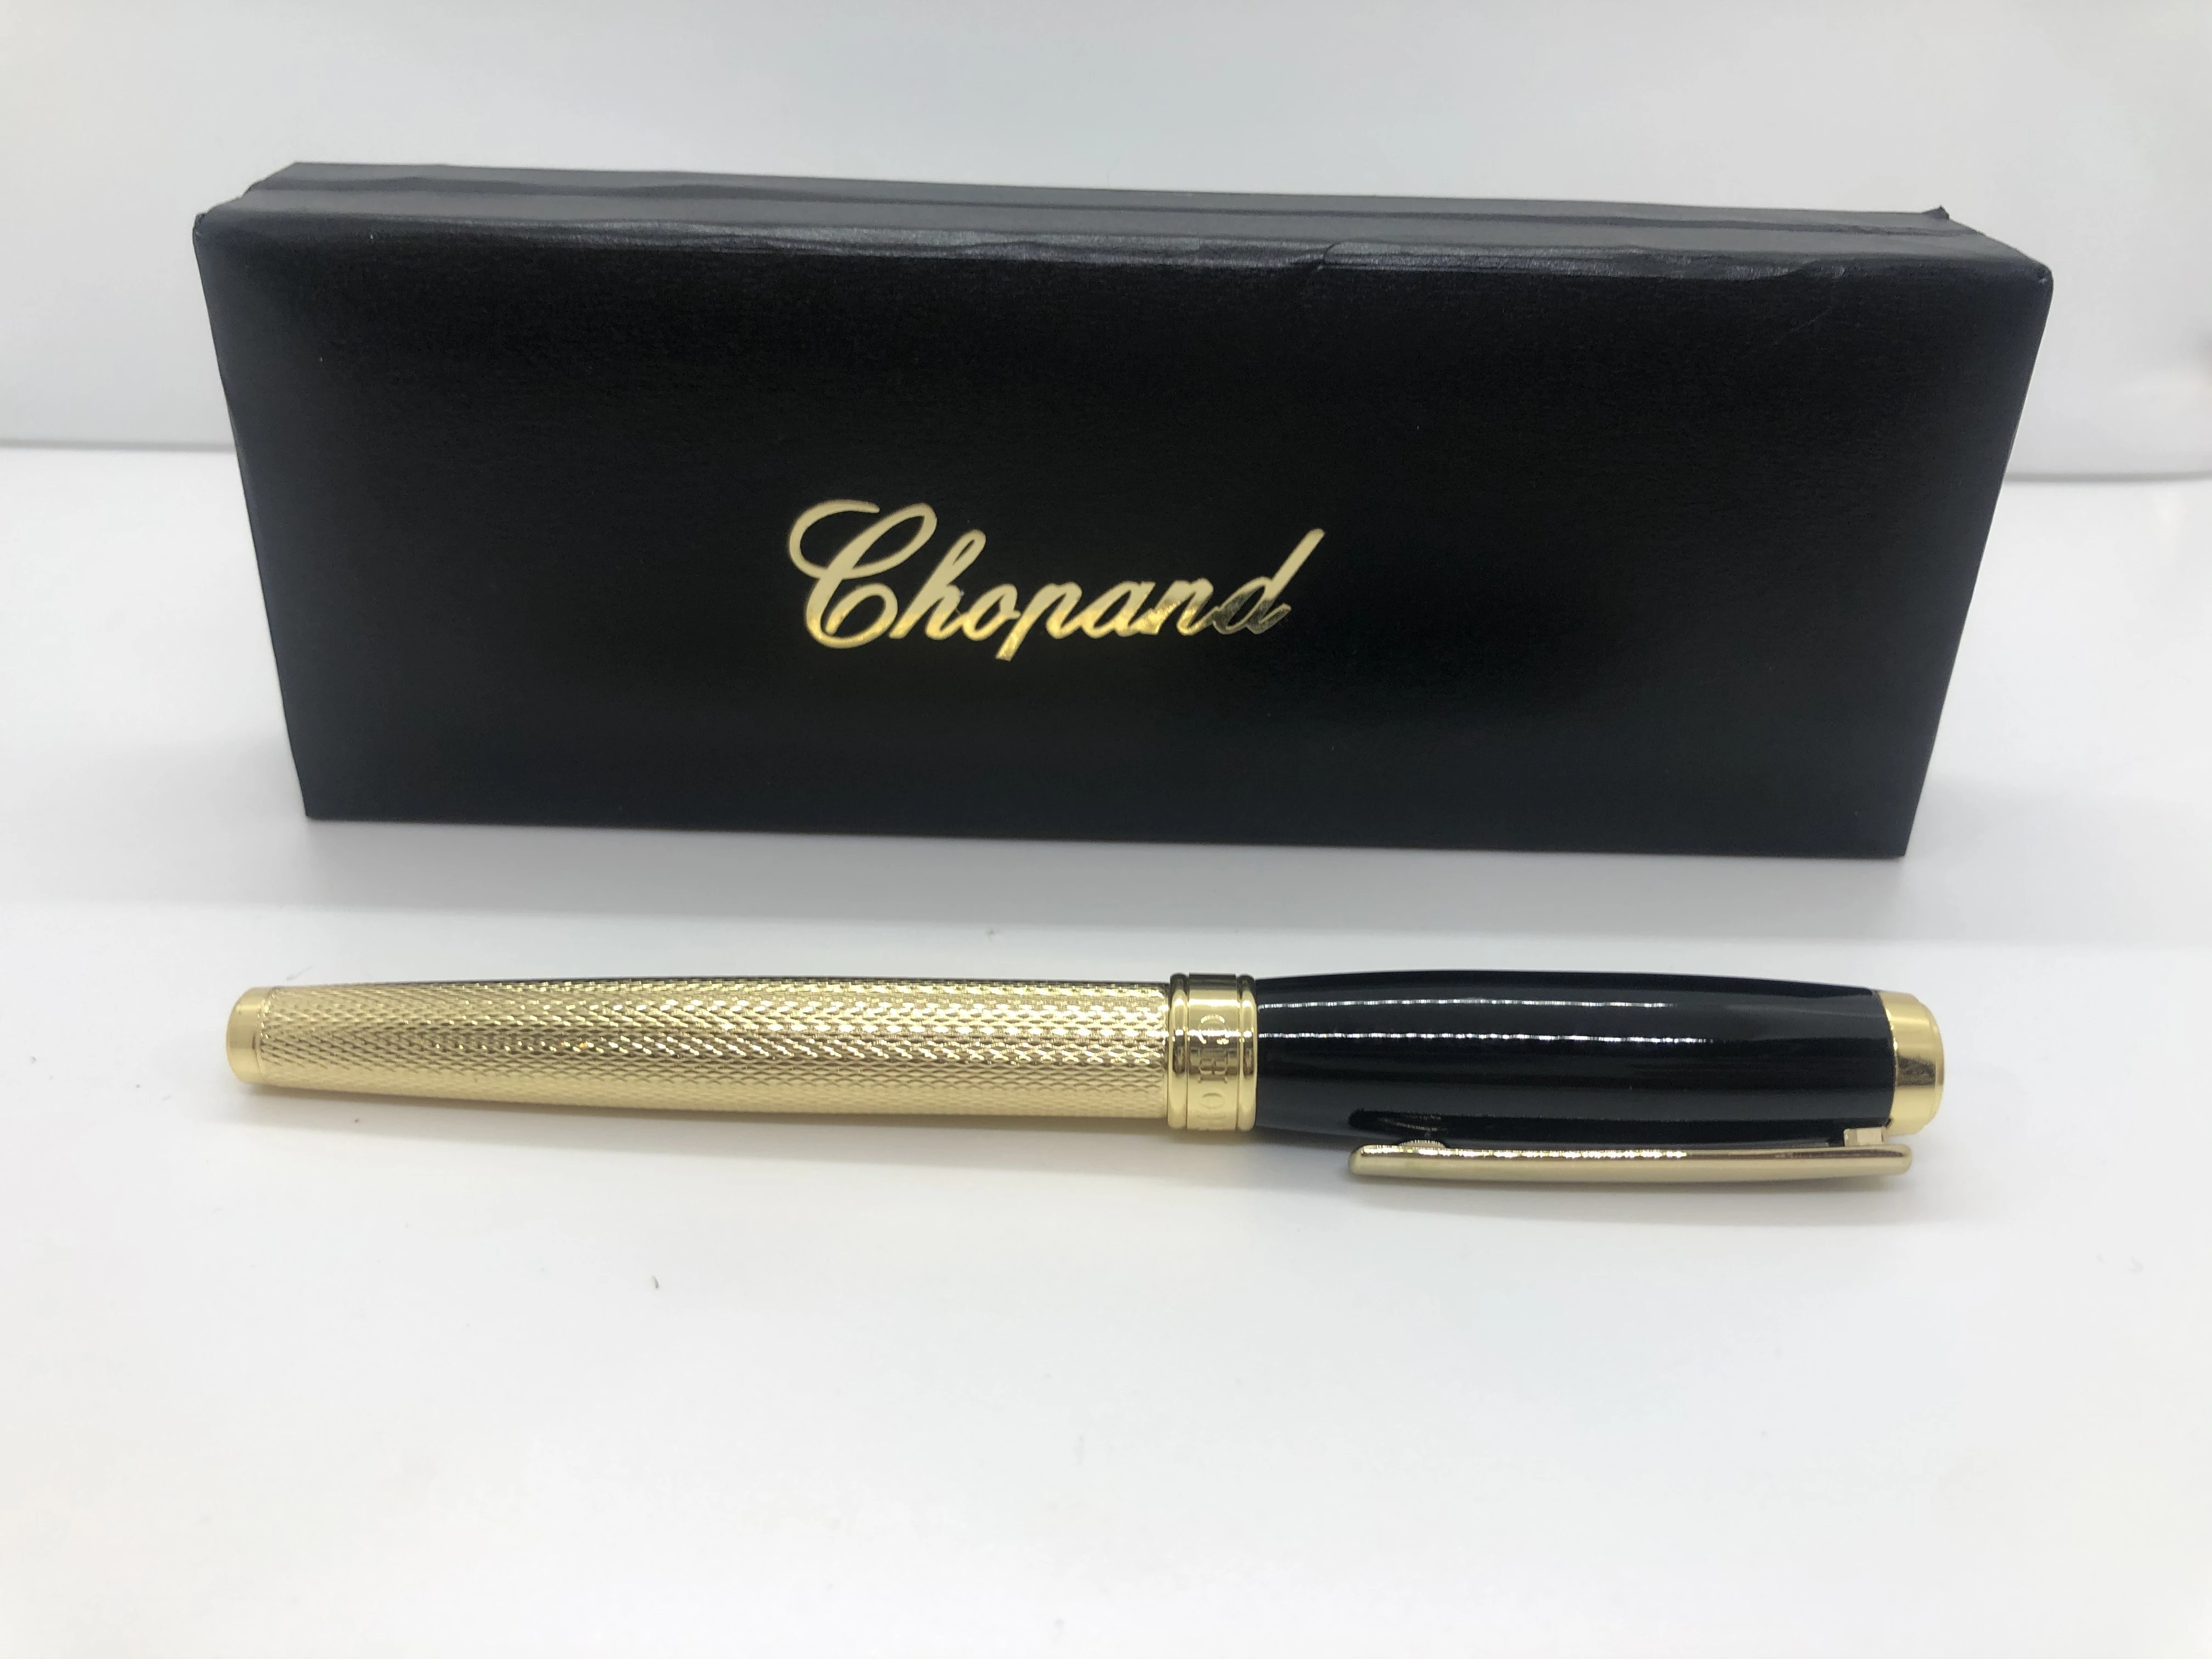 Chopard pen gold * black - with embossed touches - with the brand's logo on top and engraved in the rotation